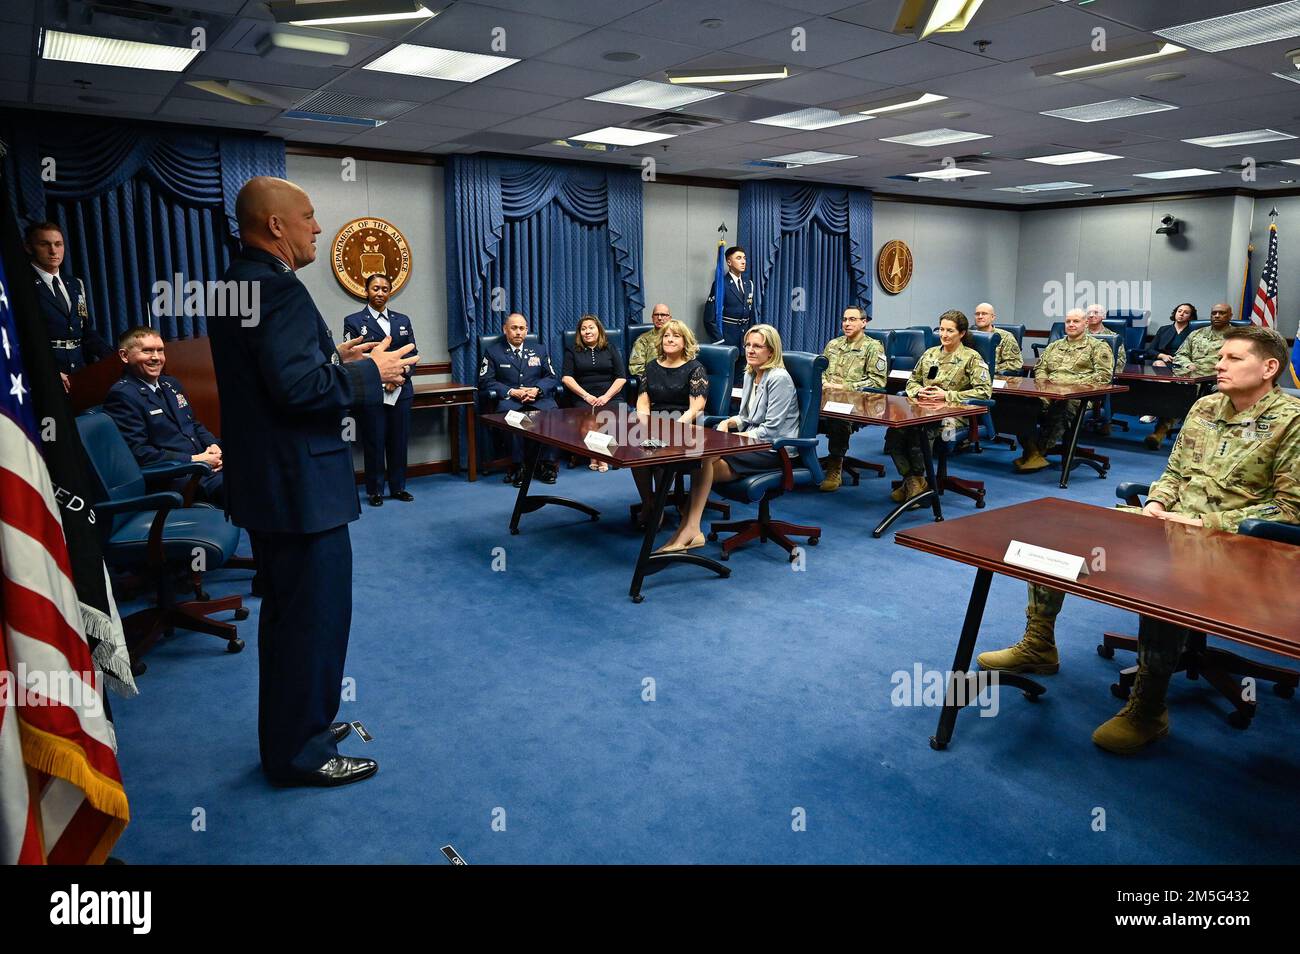 Chief of Space Operations Gen. John W. “Jay” Raymond makes remarks during the promotion of Brig. Gen. Shawn Bratton to major general at the Pentagon, Arlington, Va., March 16, 2022. Bratton is the commander of Space Training and Readiness Command. This image has been altered to obscure security badges. Stock Photo